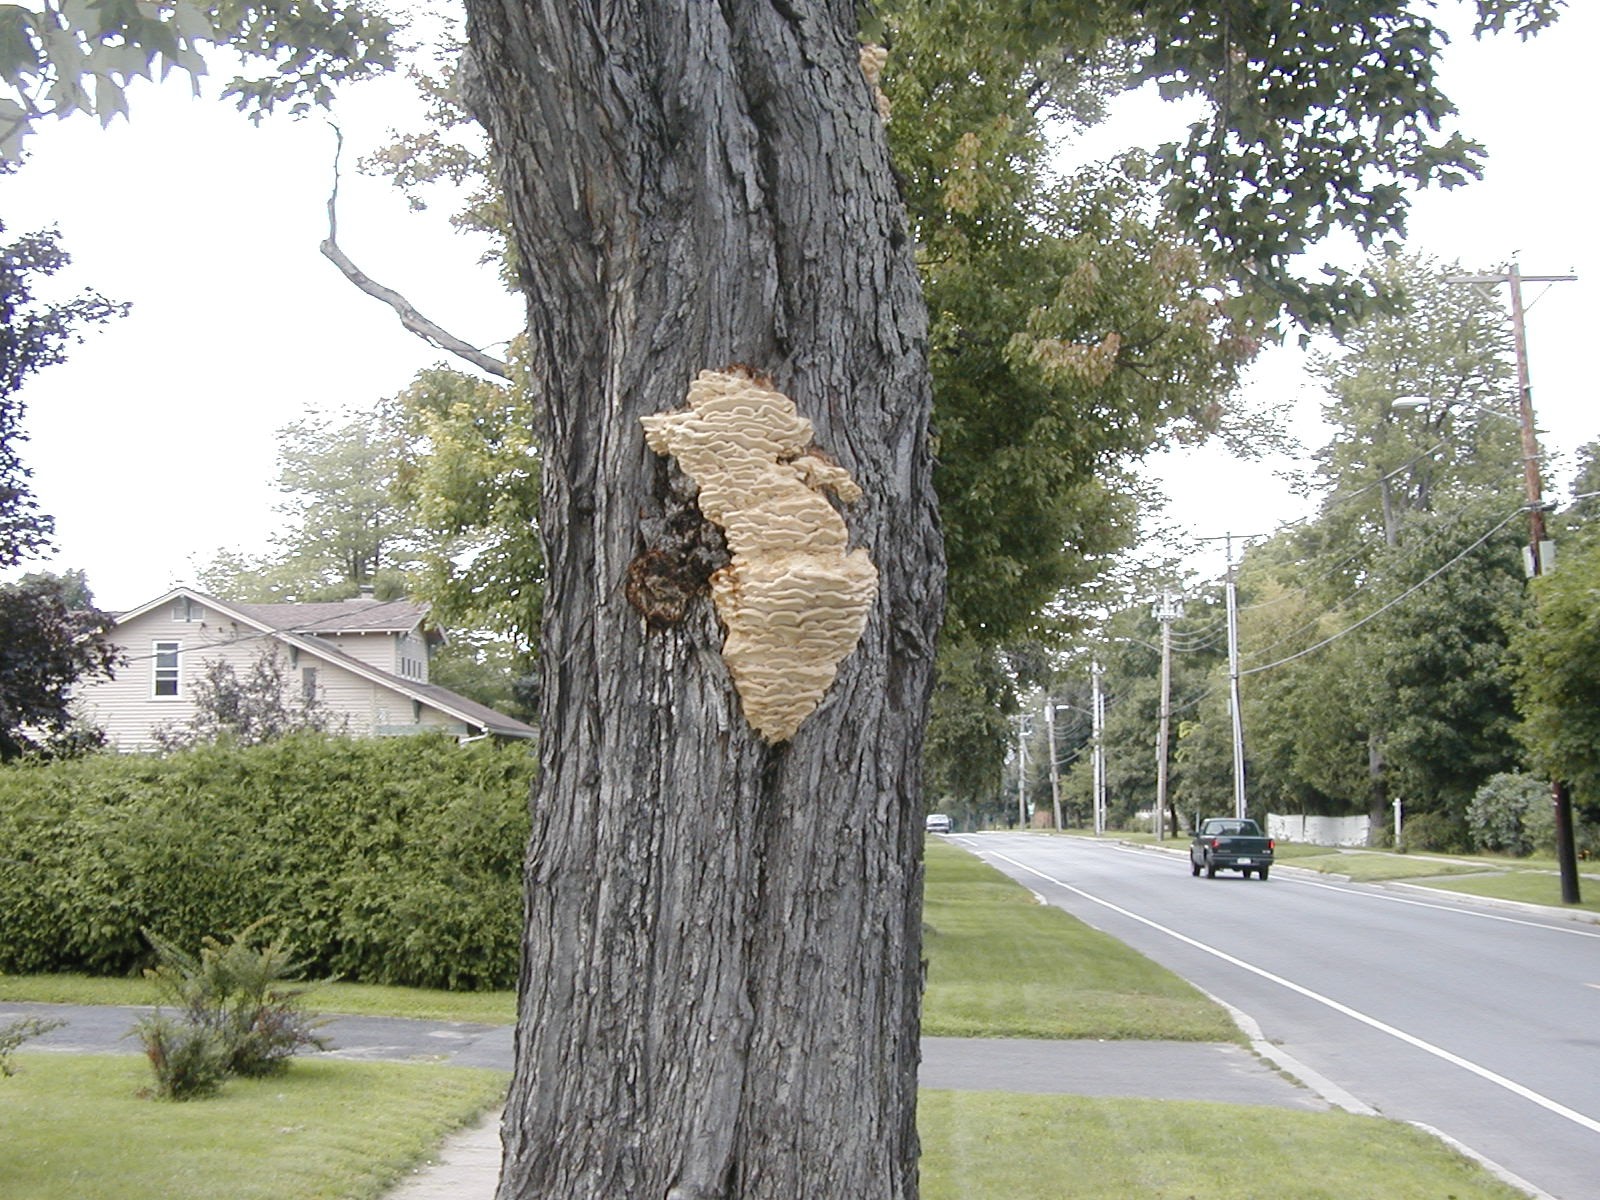 Photograph 4. Fruiting on the main trunk of the tree is a common location that many decay fungi are found.